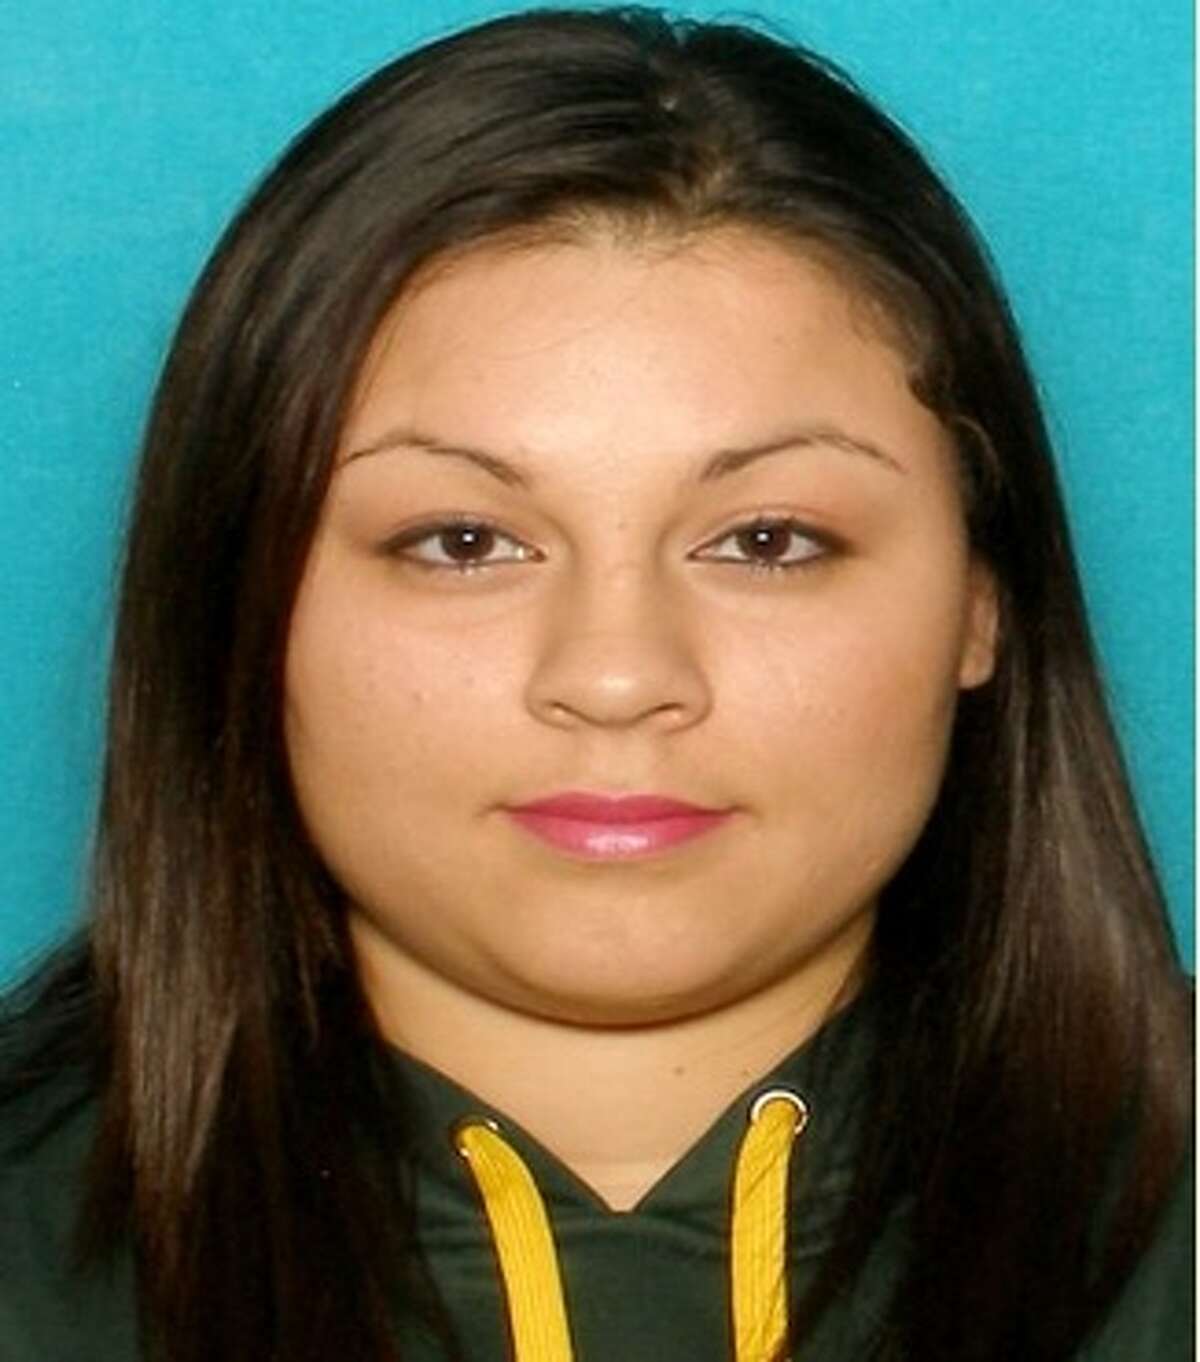 Krystal Jean Mota (11-08-90) are both wanted for Aggravated Robbery